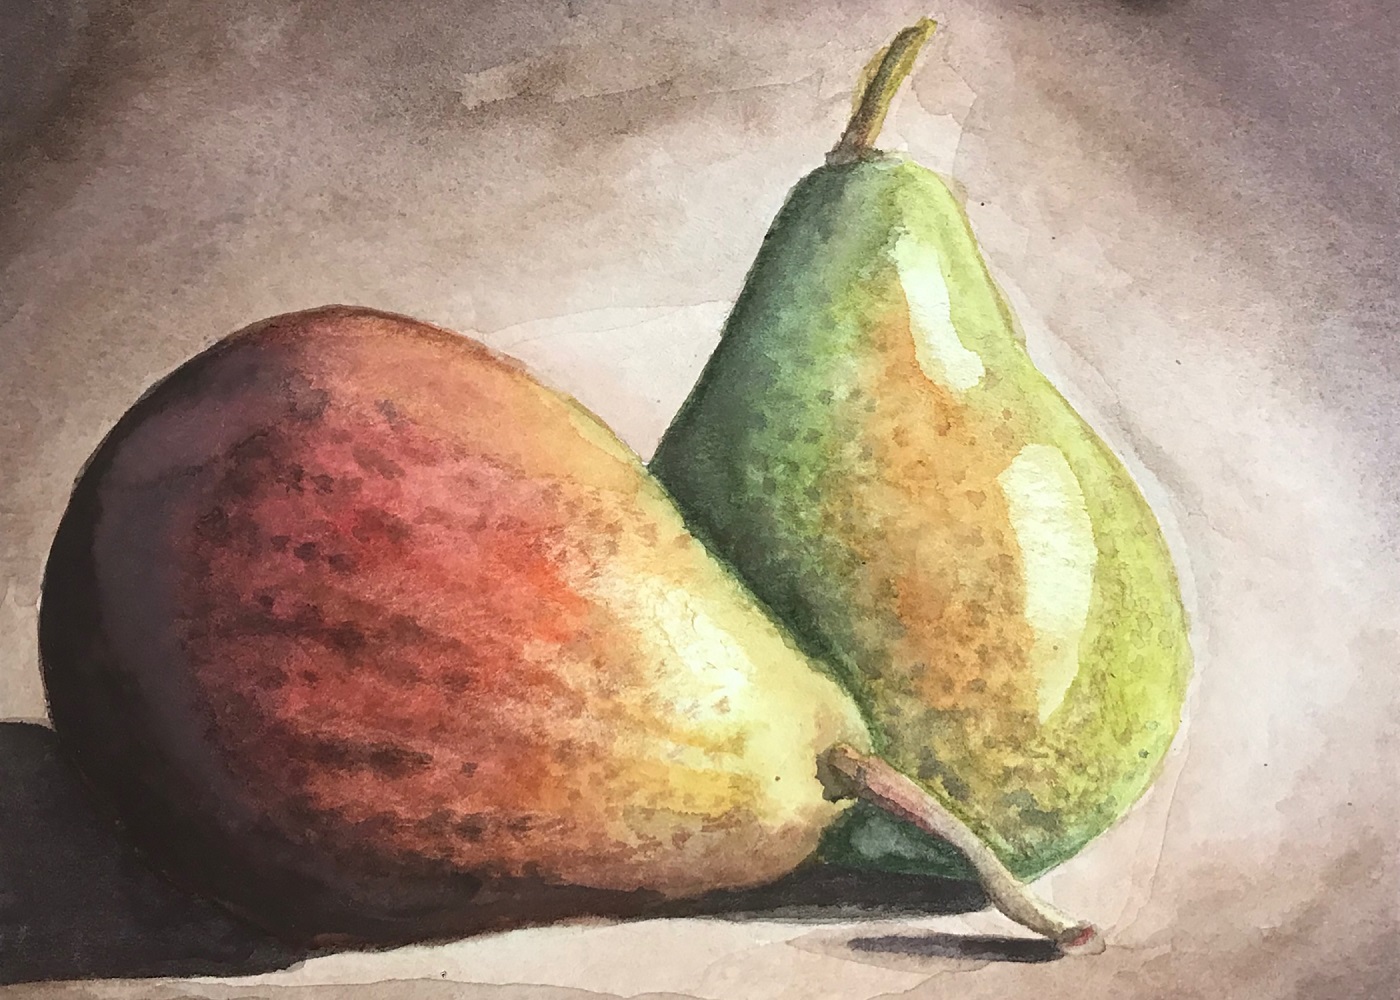 Honorable Mention: "Pears" by Natalie Cornwell, Parkway South